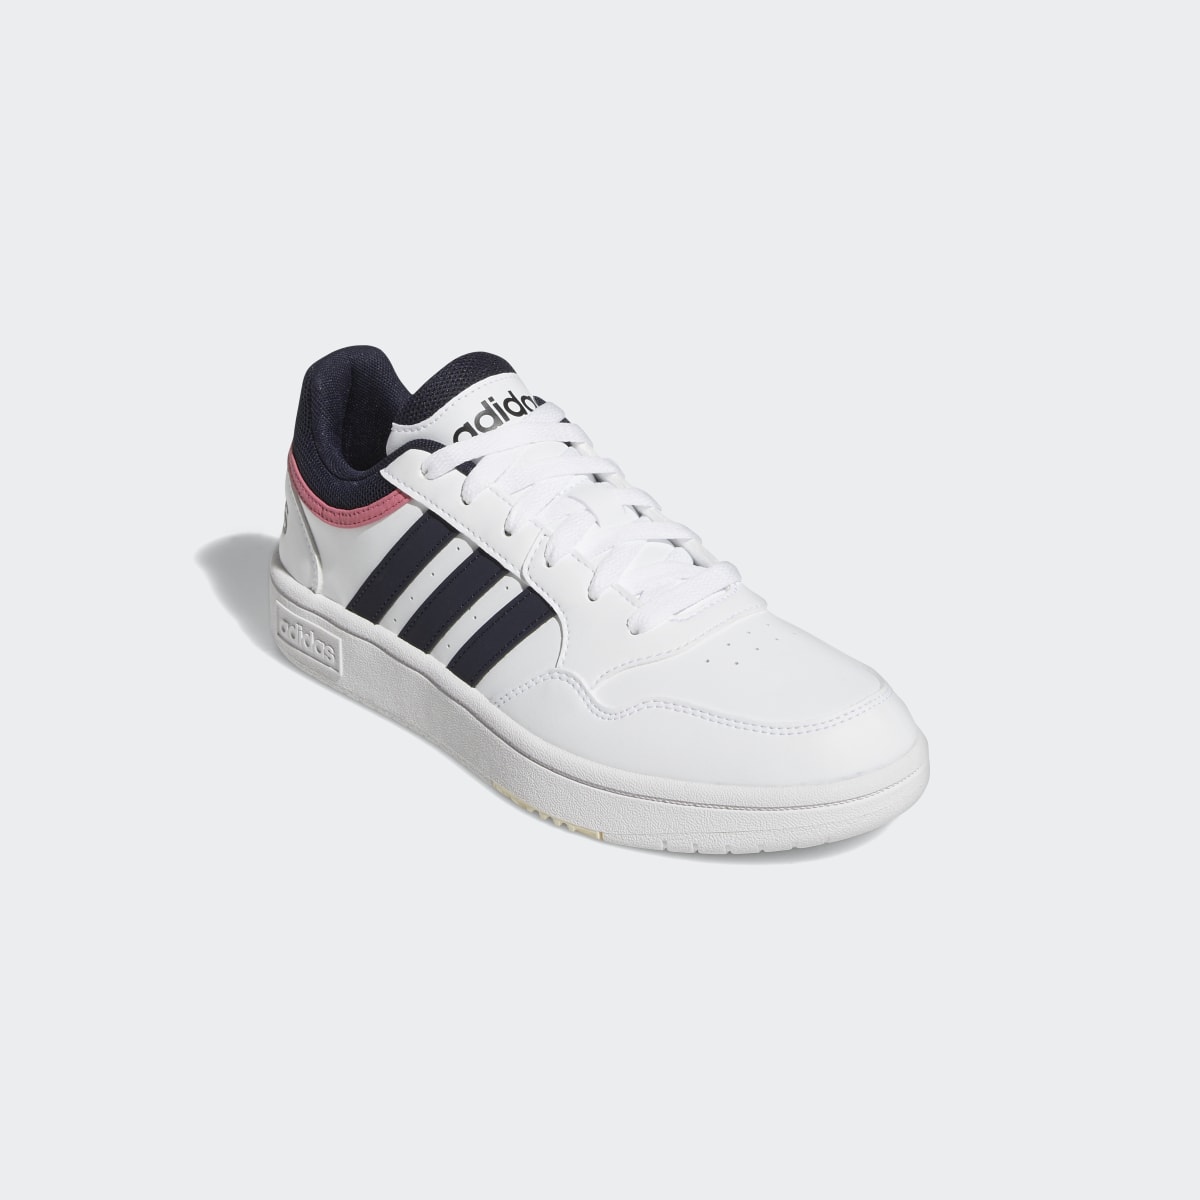 Adidas Hoops 3.0 Low Classic Shoes. 5